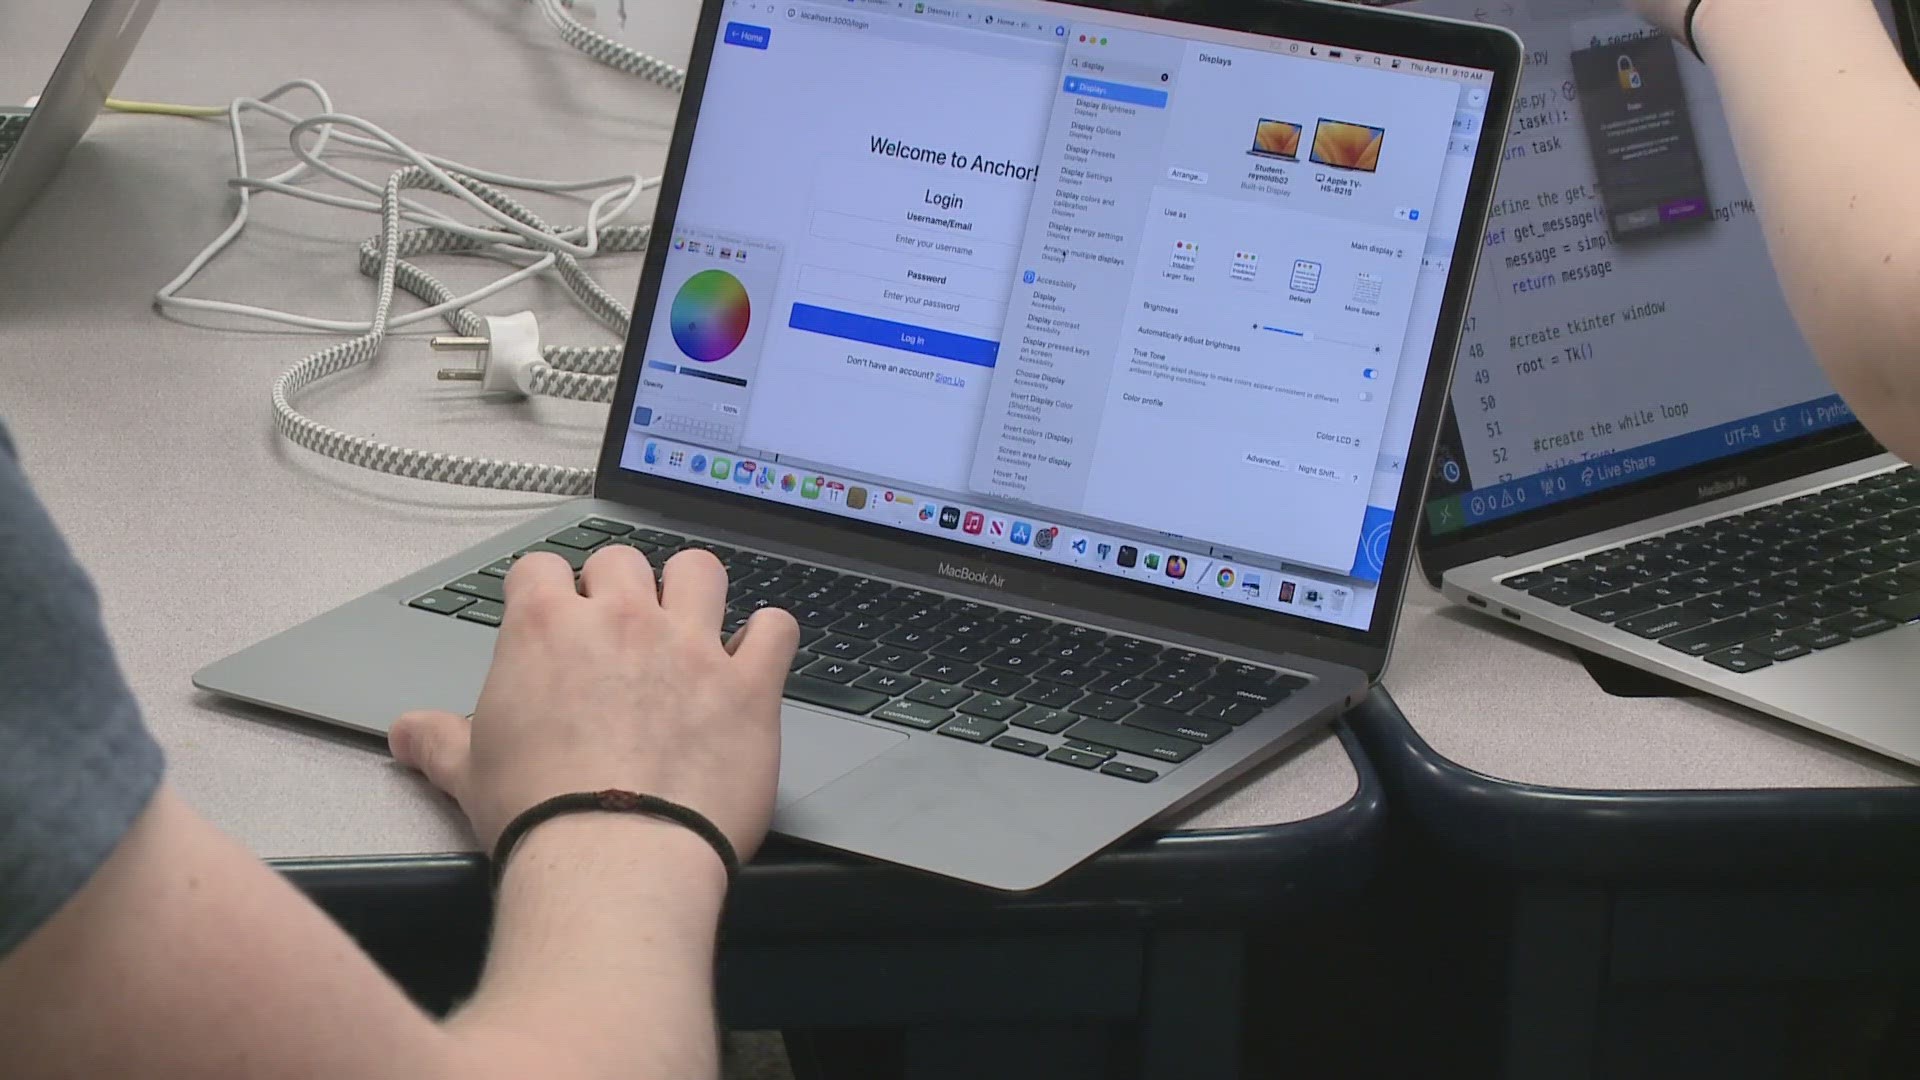 Students in the Pattonville School District celebrated a major win for their work with artificial intelligence on Thursday. Seniors at Pattonville High School won.